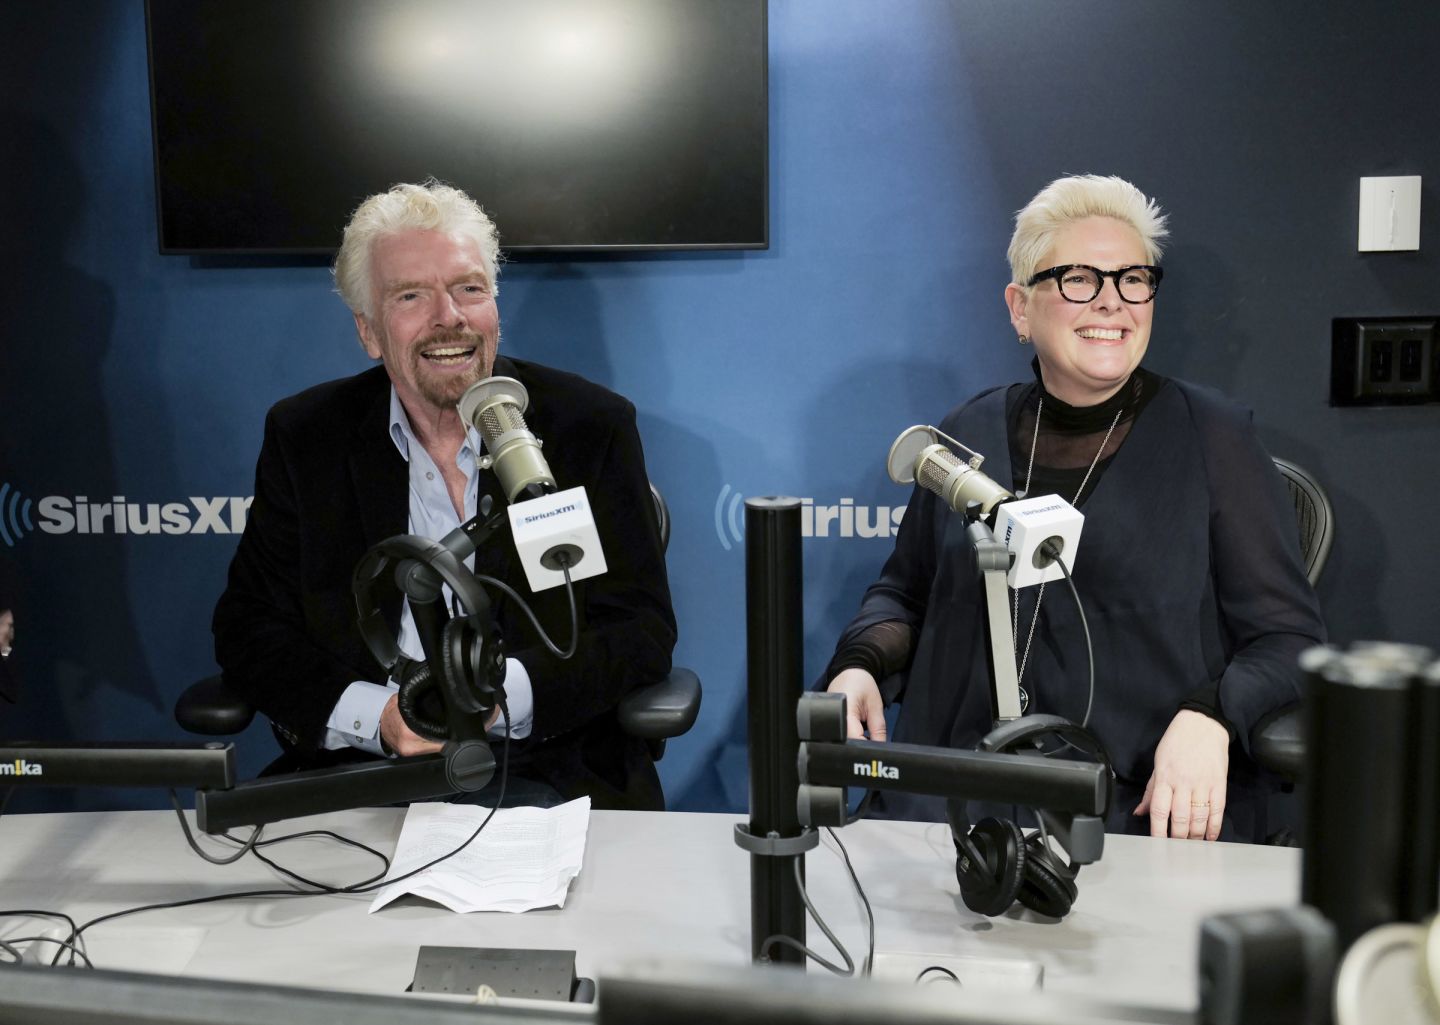 Richard Branson and Halla Tomas sitting behind microphones in the SiriusXM studio, smiling at the camera